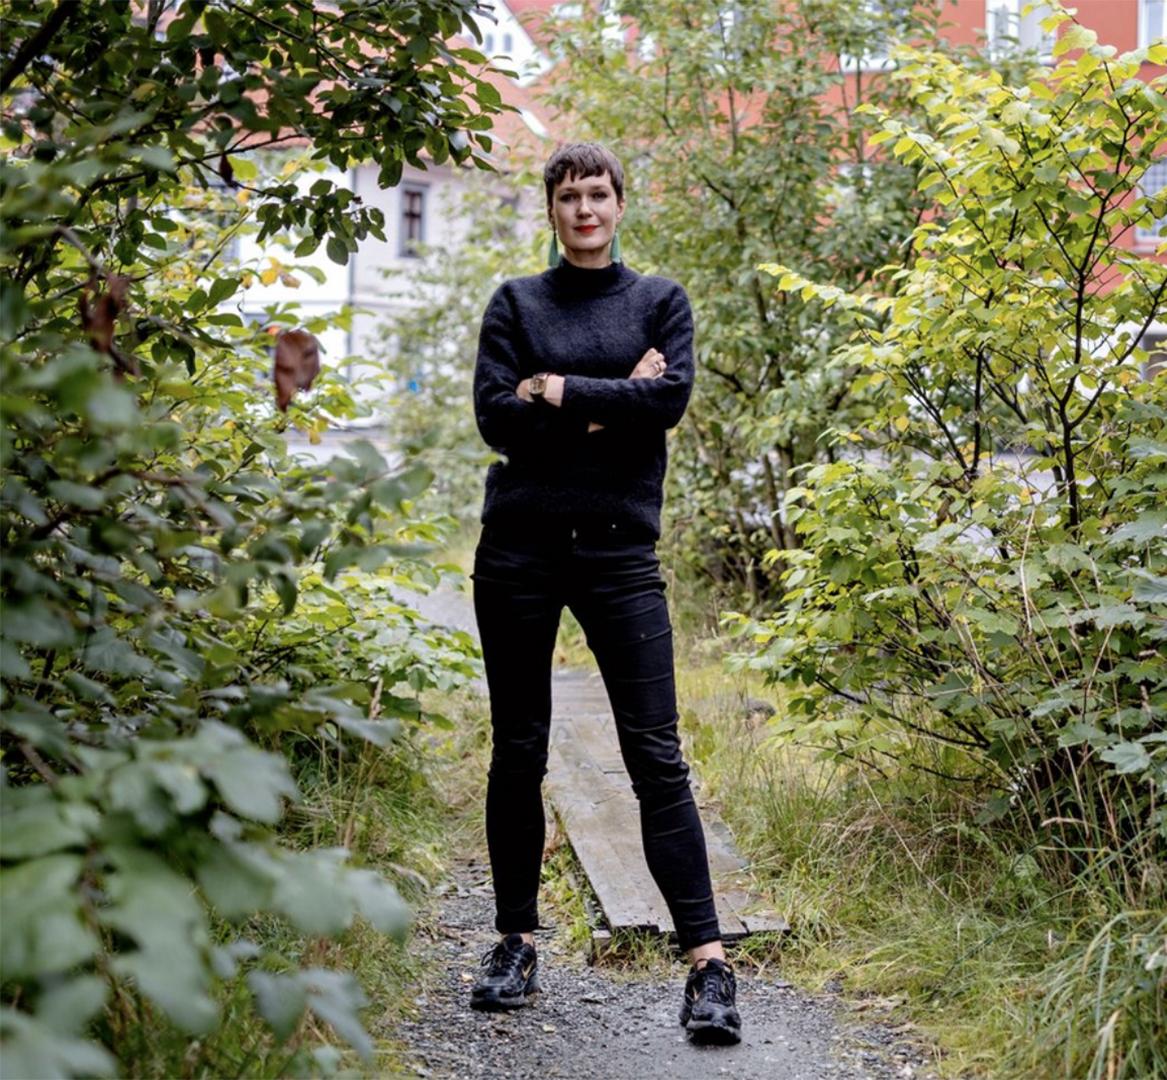 Eva Rowson is centered in the picture, where she is standing on a park path, surrounded by greenery. She is wearing black jeans and a black jumper. She is holding her arms crossed and is smiling.